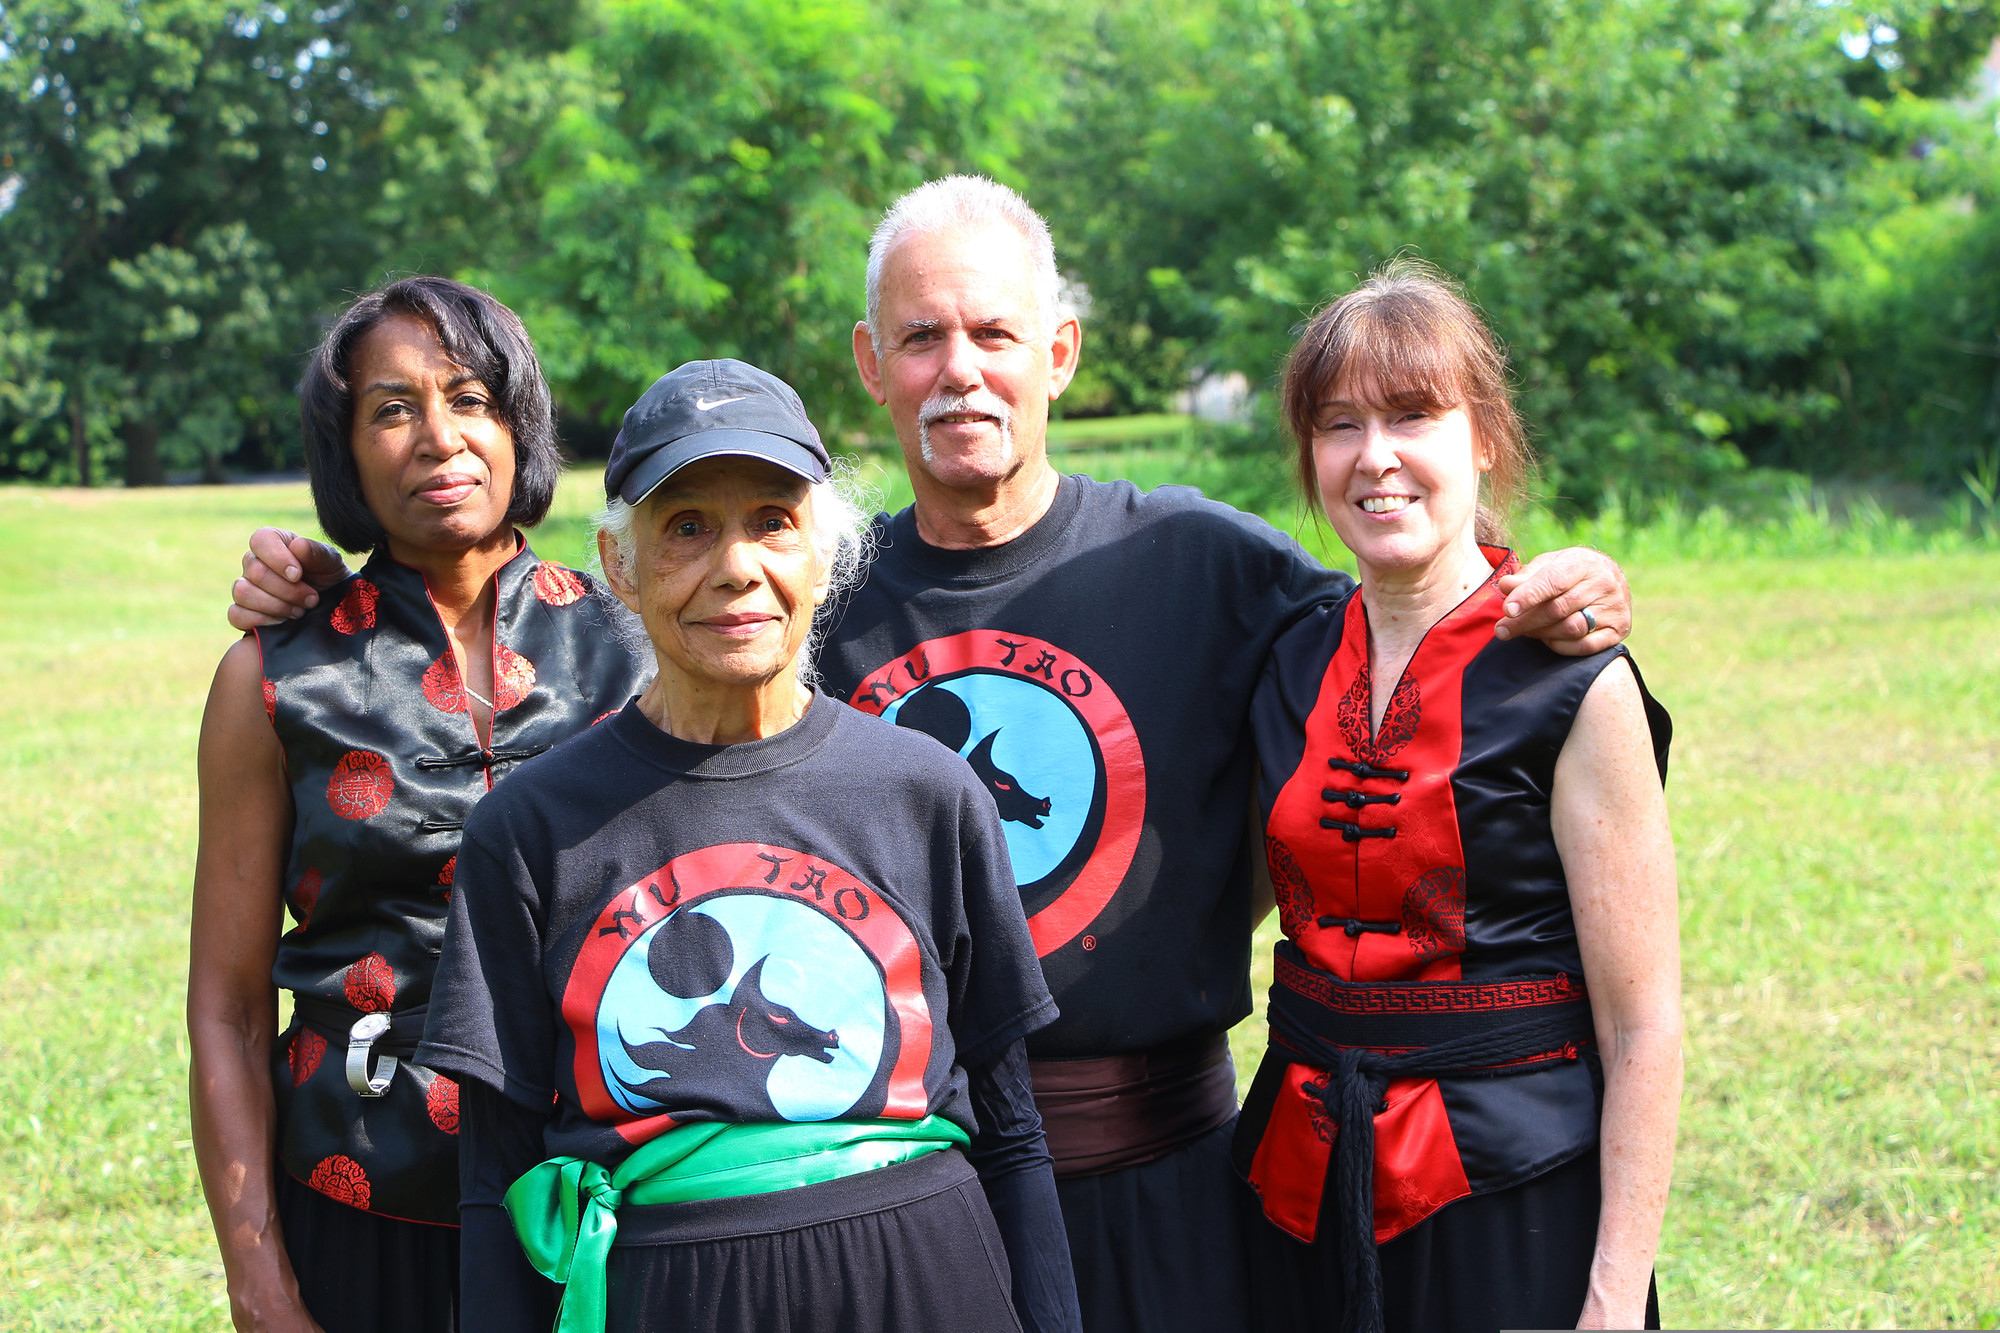 Local instructors led the first class of its kind at the Baldwin Community Garden. From left were Pam Dye, Lois Rhyhie, Bill Neylon and Maureen Geaney, the master instructor.